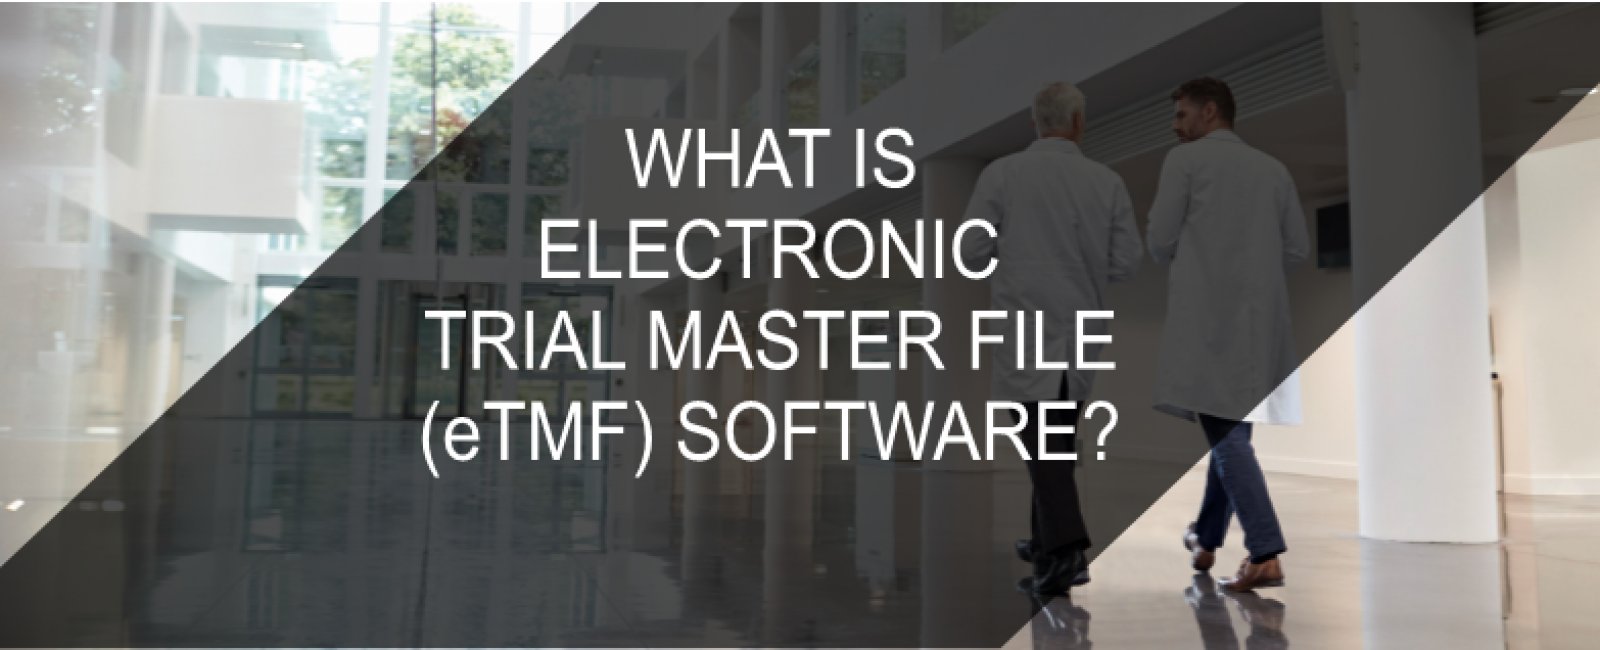 What is eTMF - electronic Trial Master File Software?